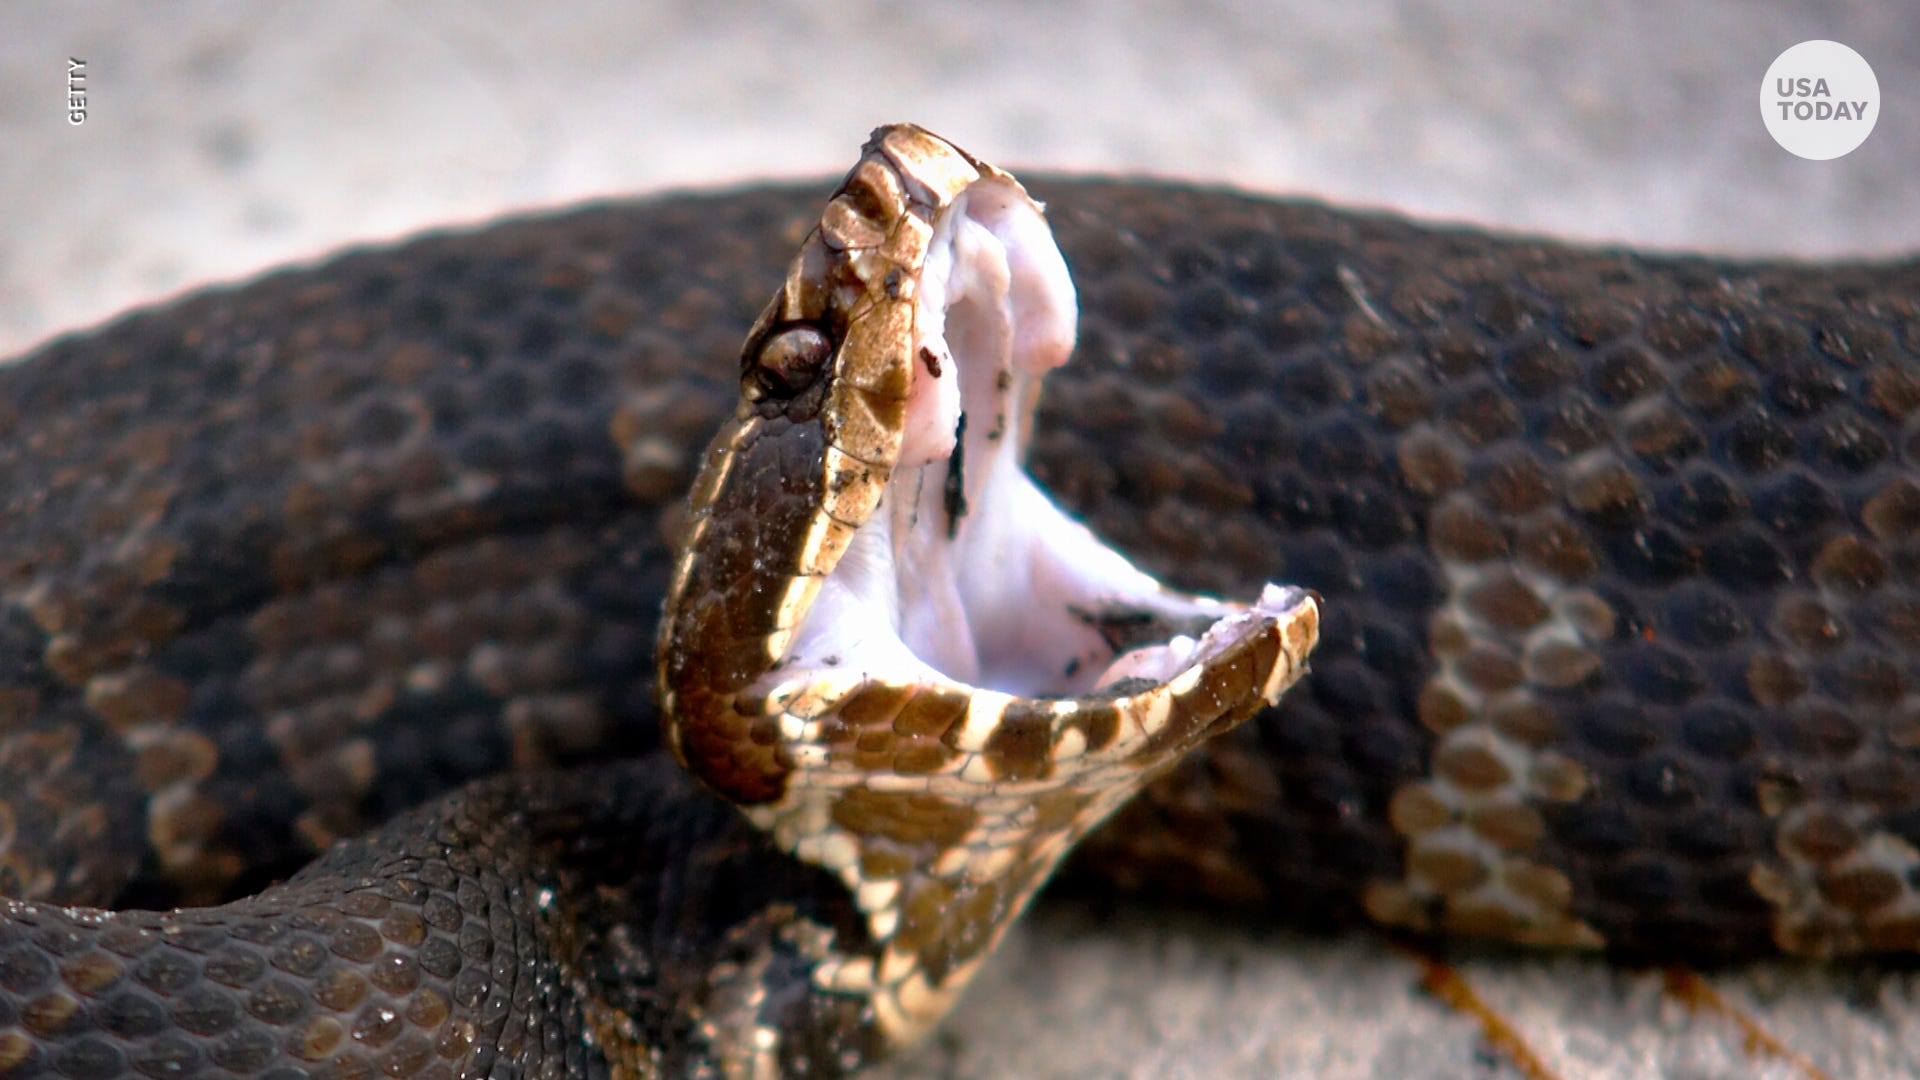 Experts Provide Tips About Handling Snakes That Get Inside Your Home